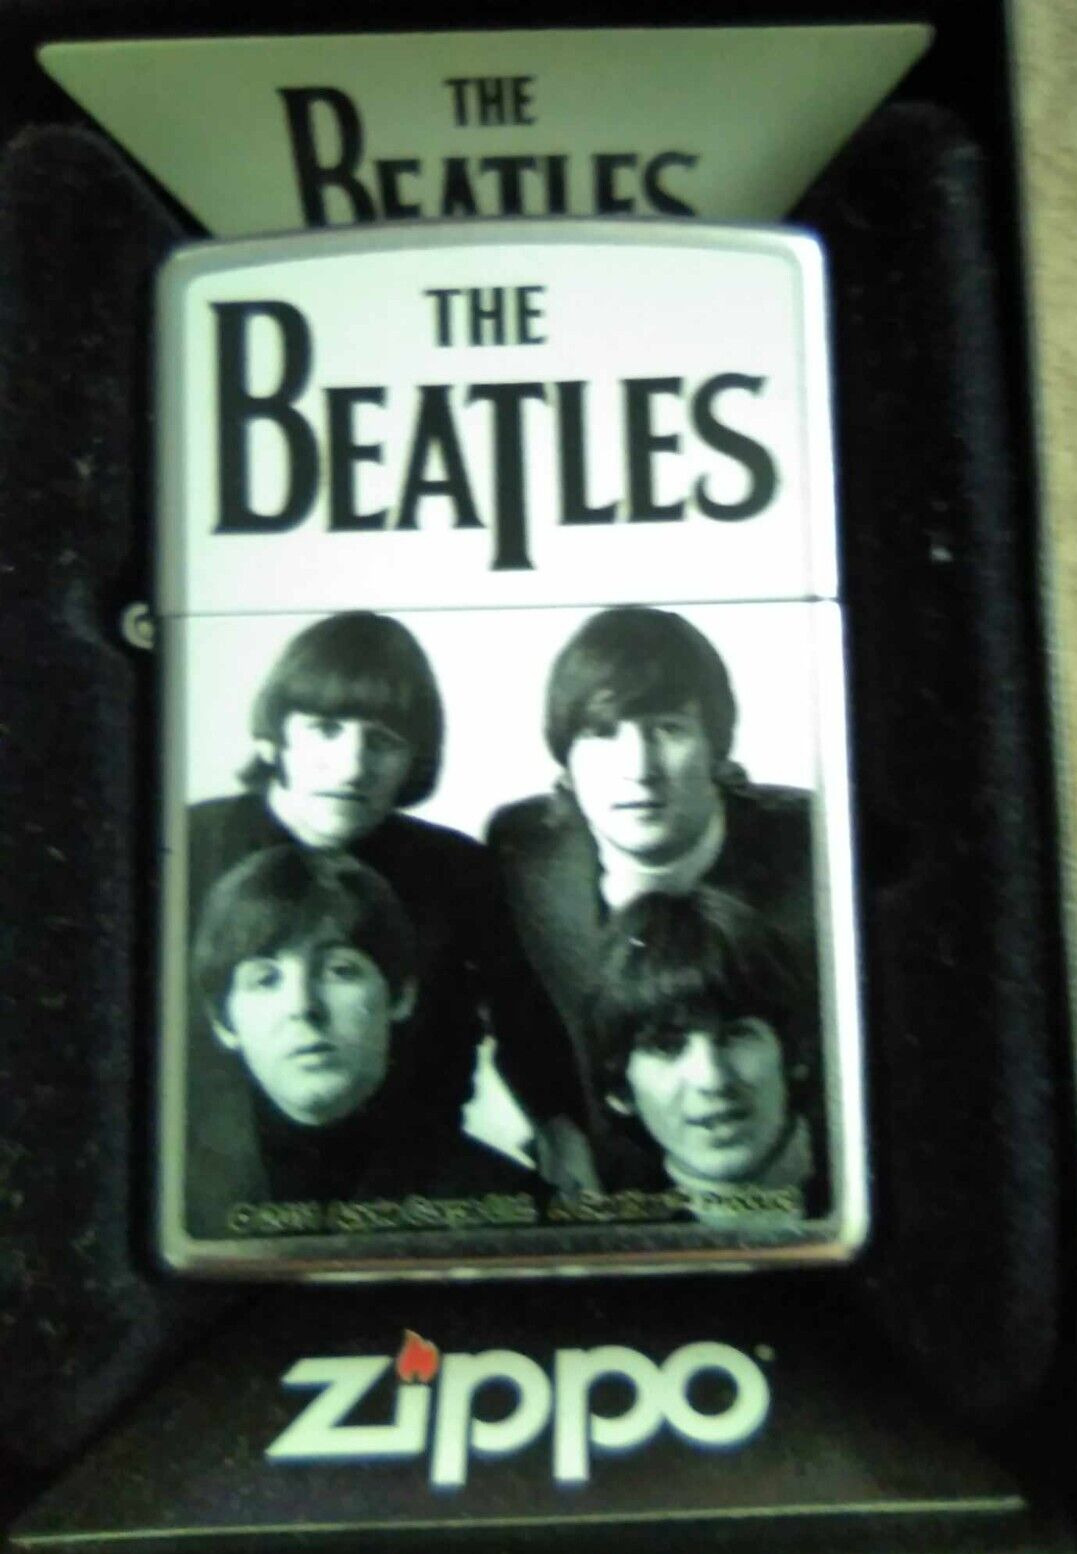 THE BEATLES ZIPPO  RARE MID 60s PHOTO ON THE LIGHTER NEW IN BOX = PRICE REDUCED